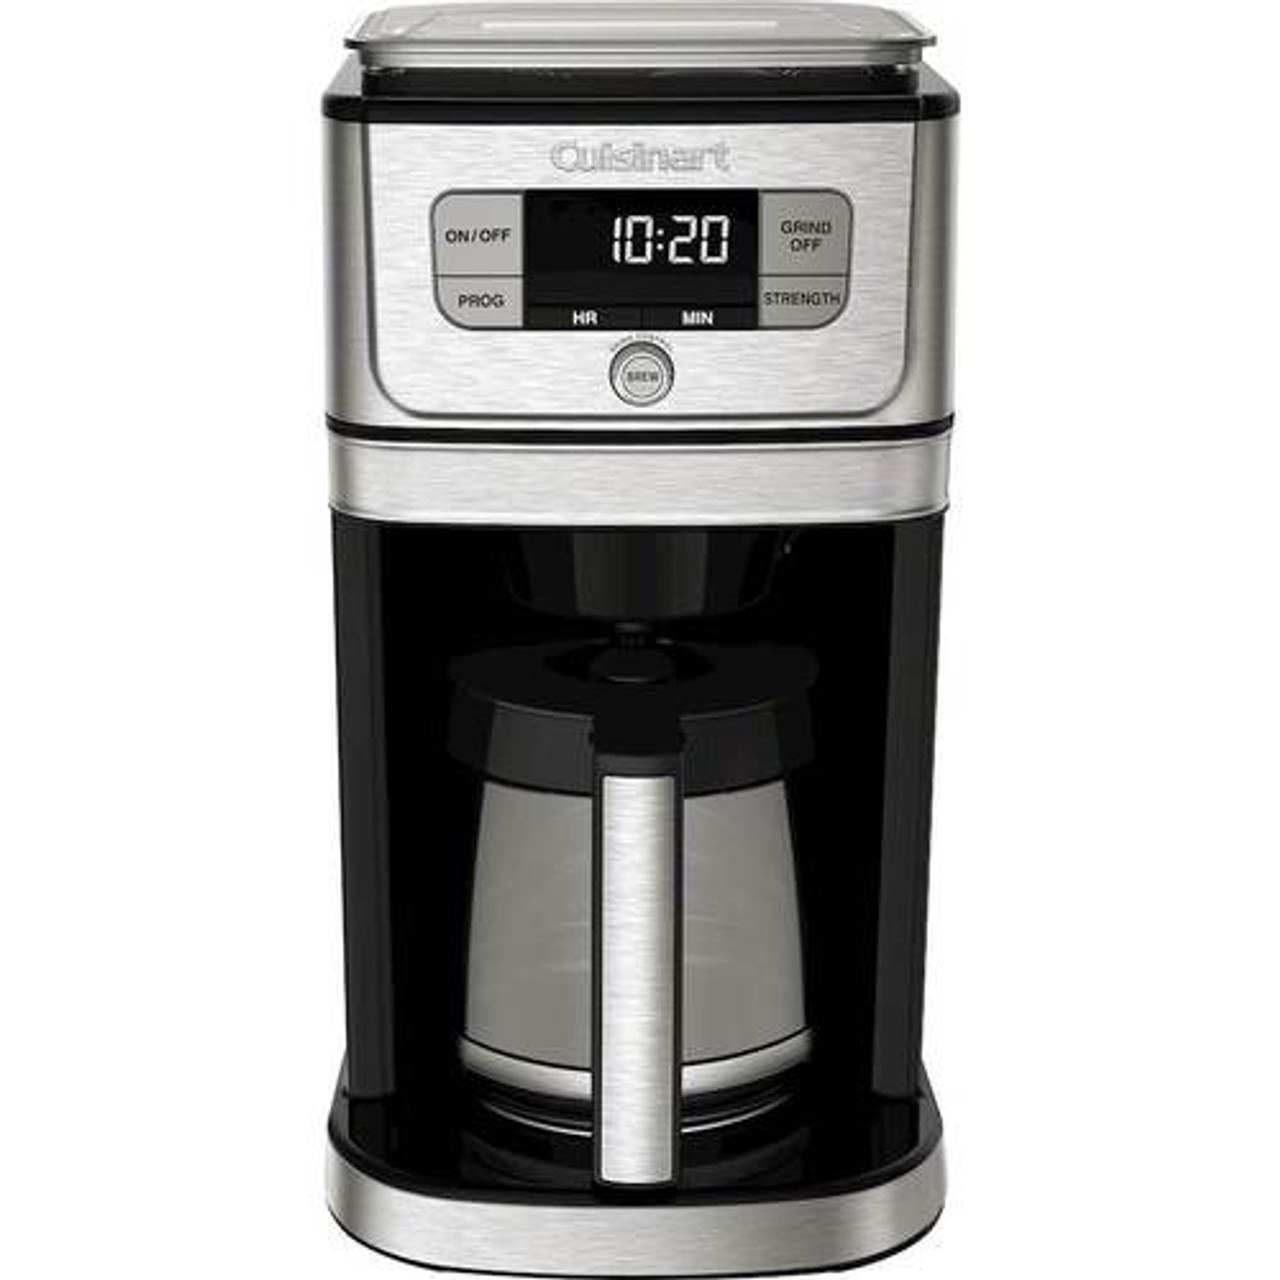 Cuisinart - Grind & Brew 12-Cup Coffee Maker - Black/Stainless